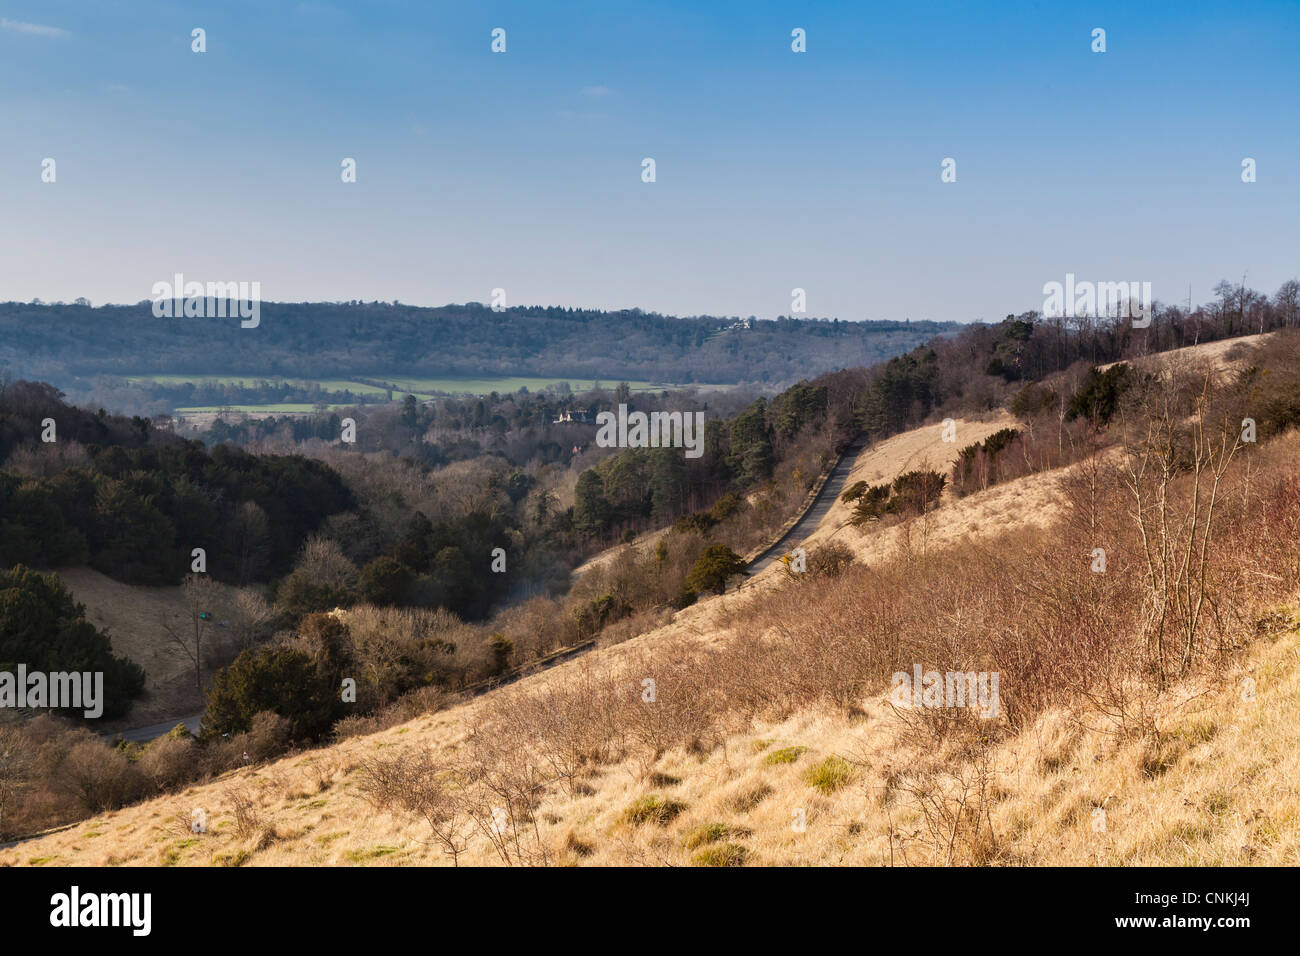 A view of Box hill Surrey, England showing the steep road leading to the top. Stock Photo